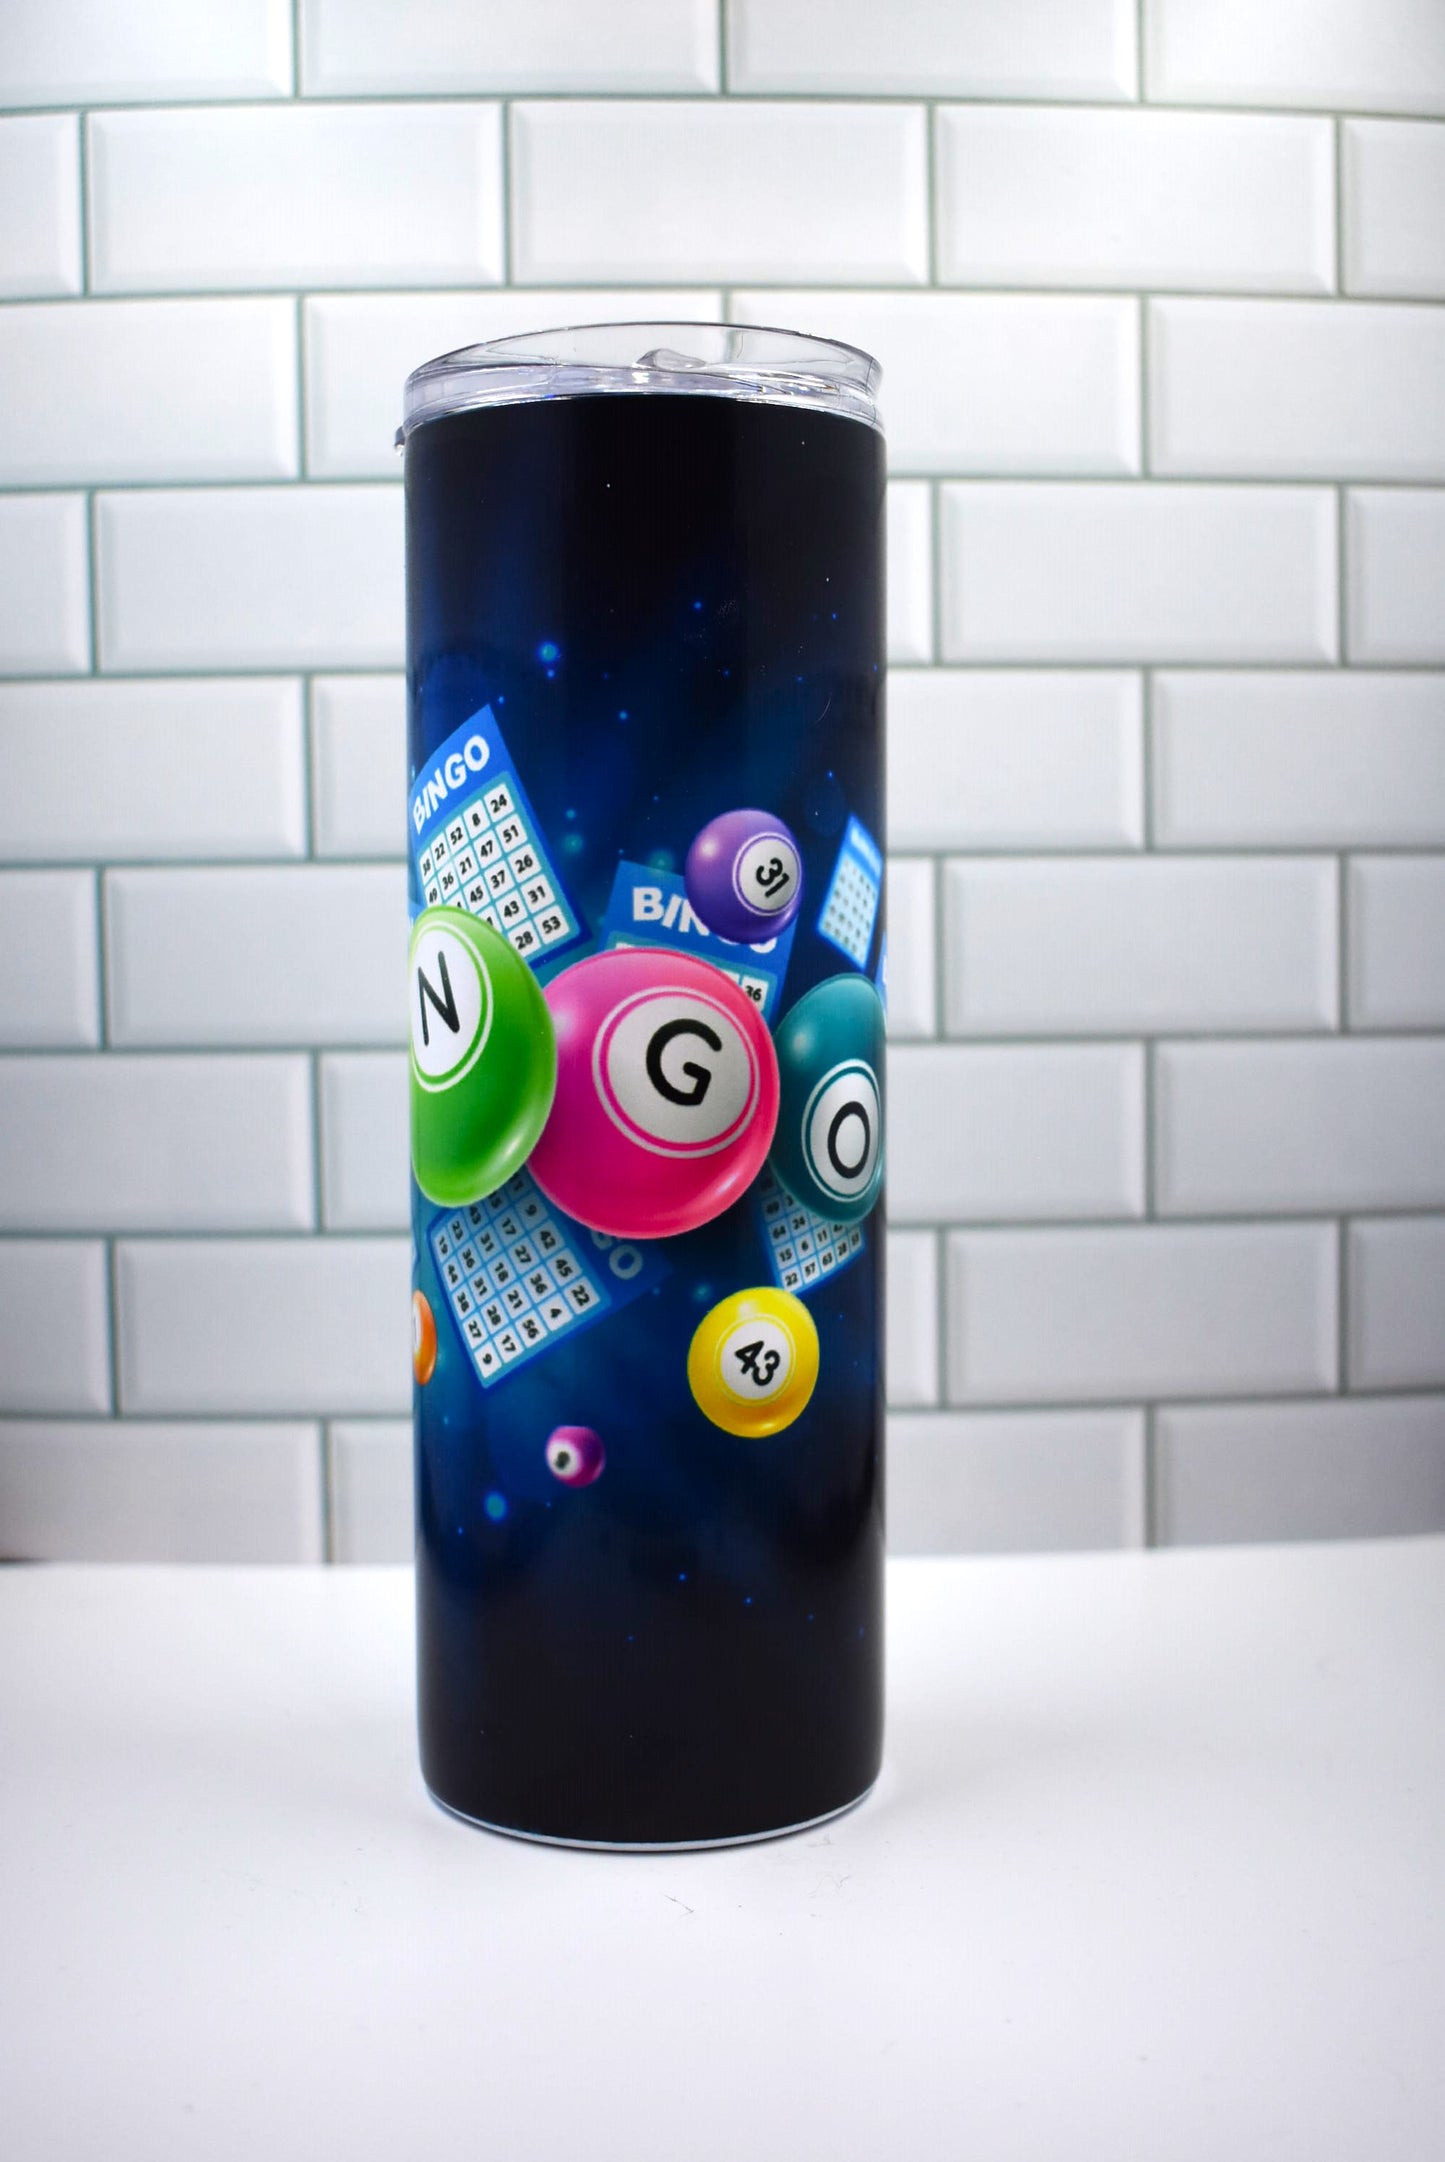 Boasting a 20 oz capacity and made from stainless steel and vacuumed insulated material, this Makerflo tumbler features the classic BINGO! image along with the iconic numbered ping pong balls. 